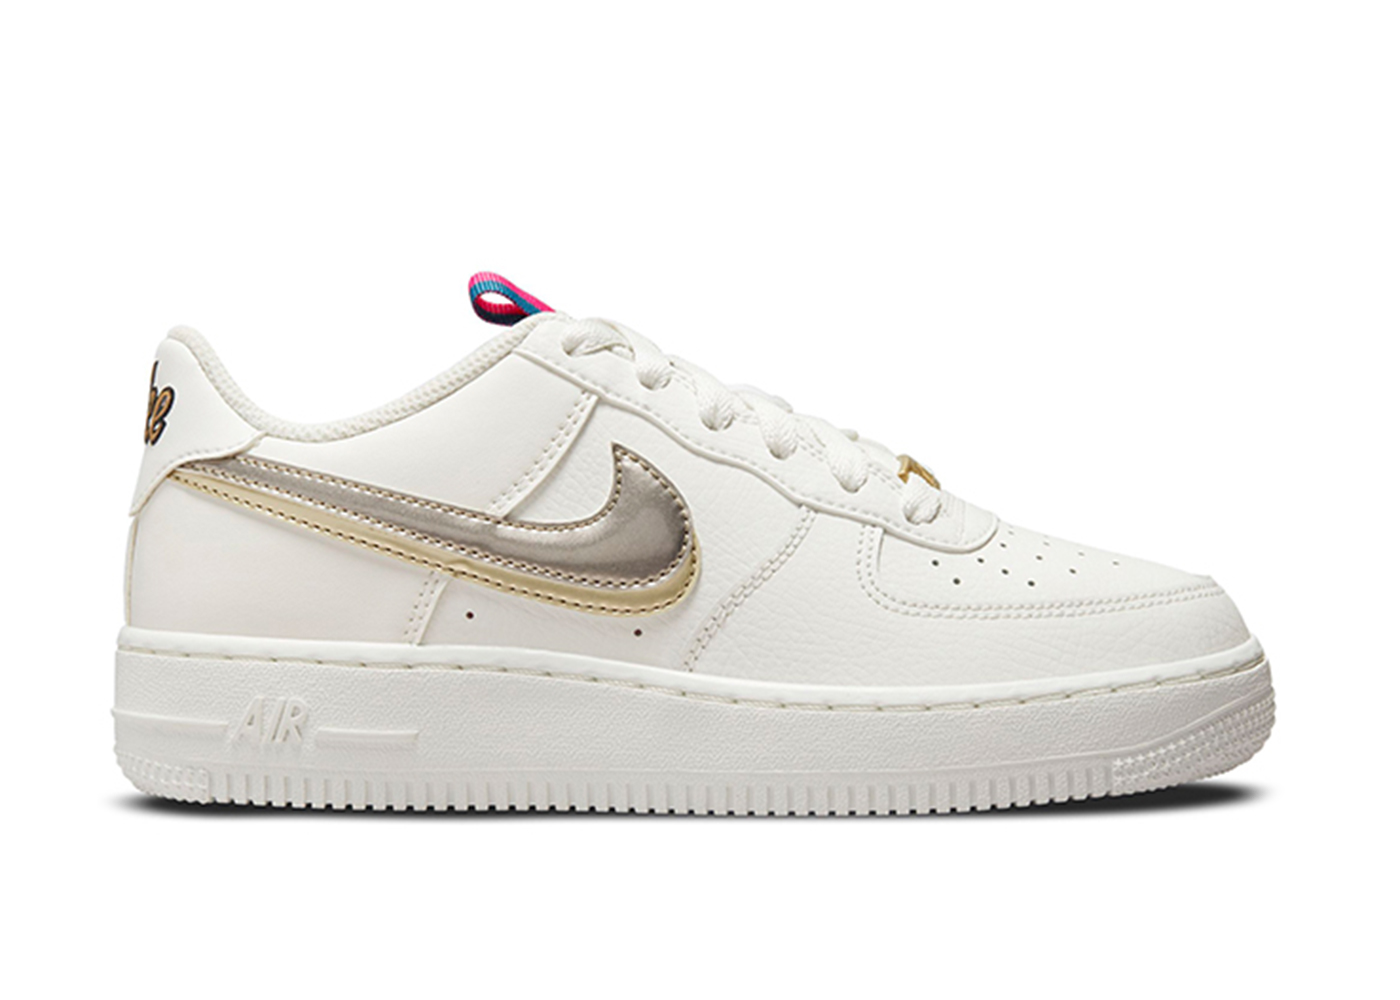 Nike Air Force 1 LV8 Double Swoosh 